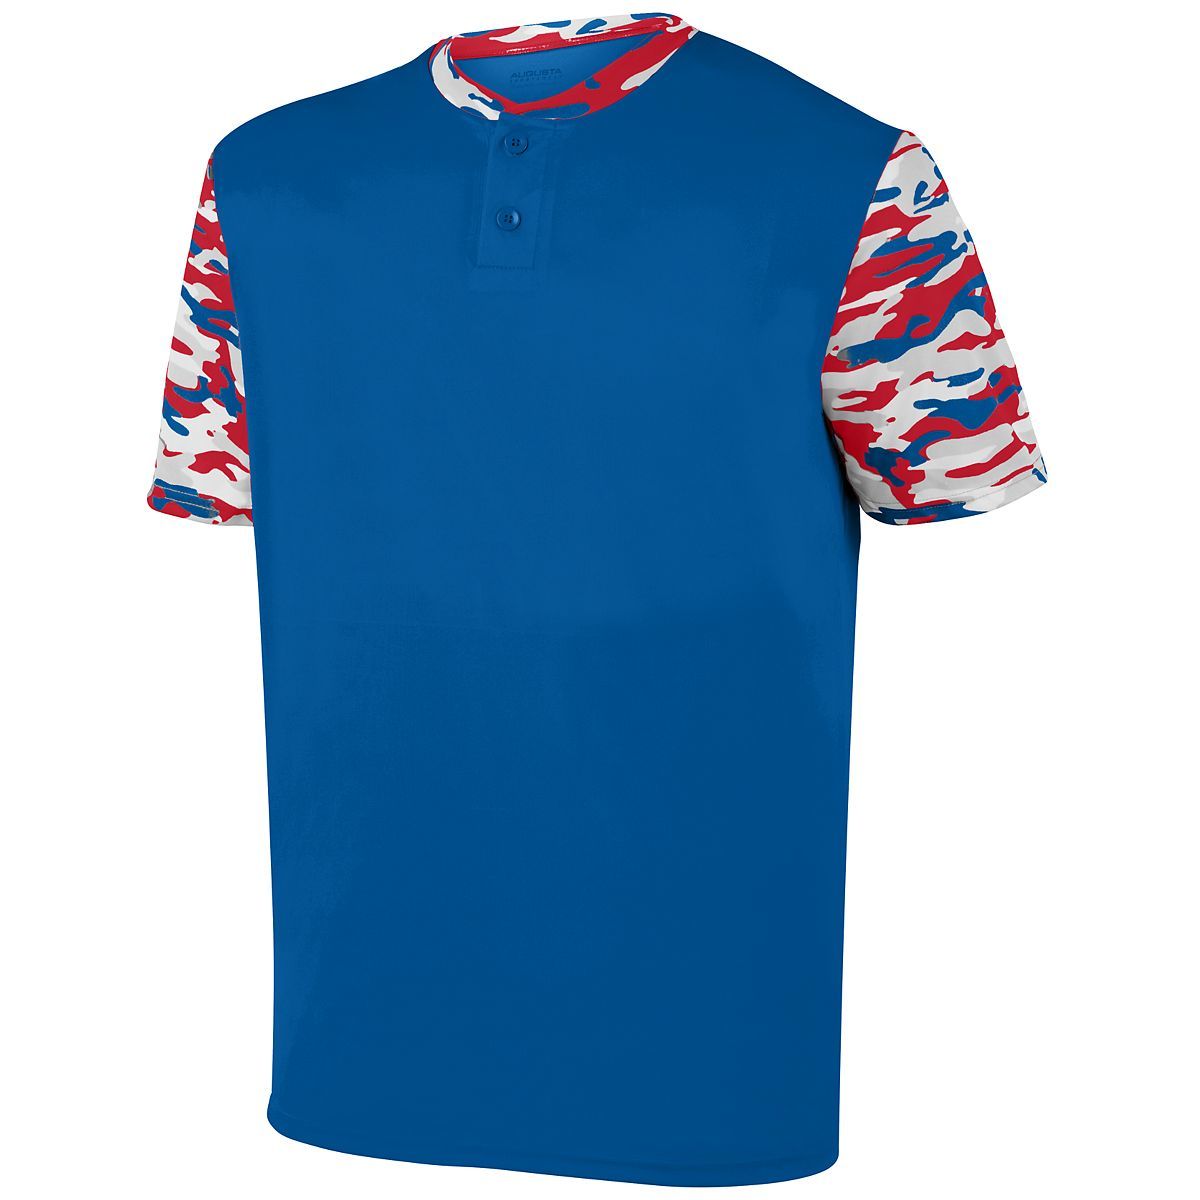 Augusta Sportswear Youth Pop Fly Jersey in Royal/Red Royal Mod  -Part of the Youth, Youth-Jersey, Augusta-Products, Baseball, Shirts, All-Sports, All-Sports-1 product lines at KanaleyCreations.com